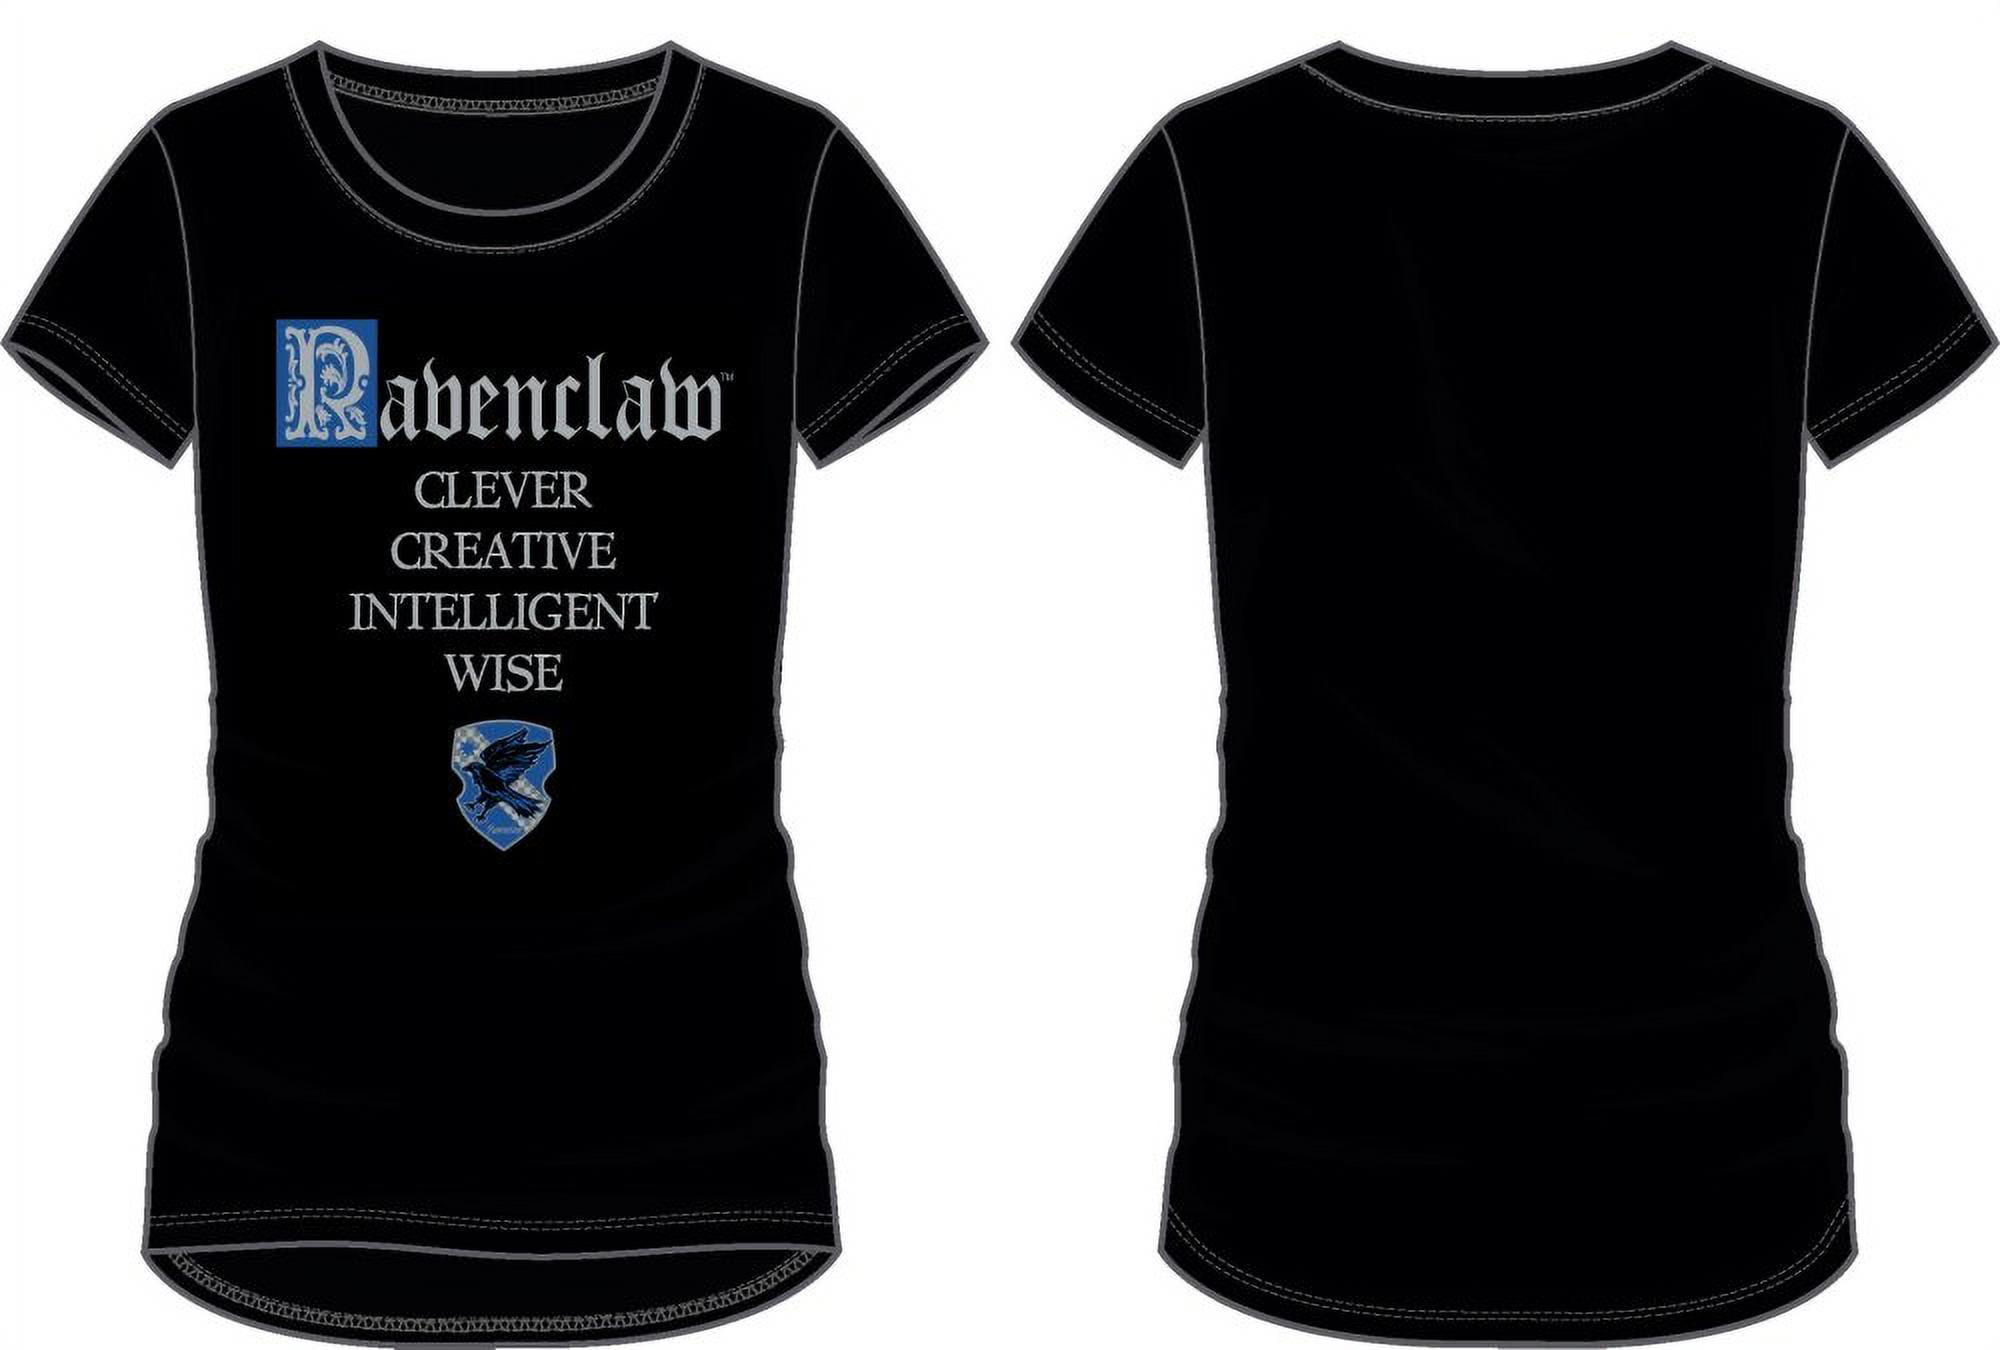 Intelligent T-Shirt Potter House Wise Creative Tee Characteristics & Crest Ravenclaw of Harry Shirt-Small Black Juniors Clever